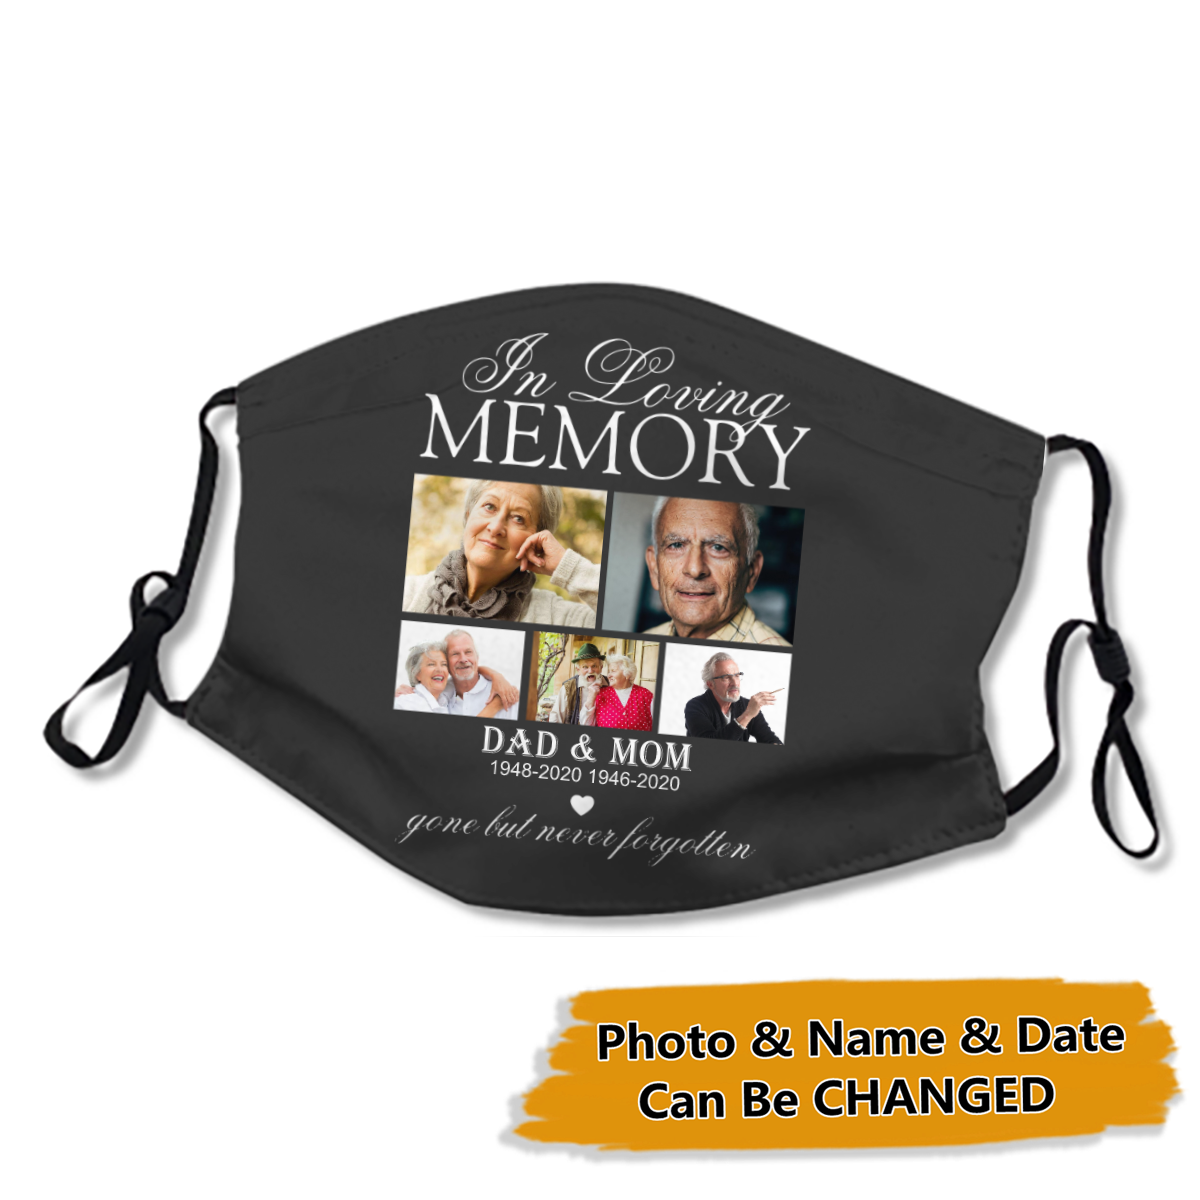 In Loveing Memorial personalized 5 Photos & Name & Date Face Mask